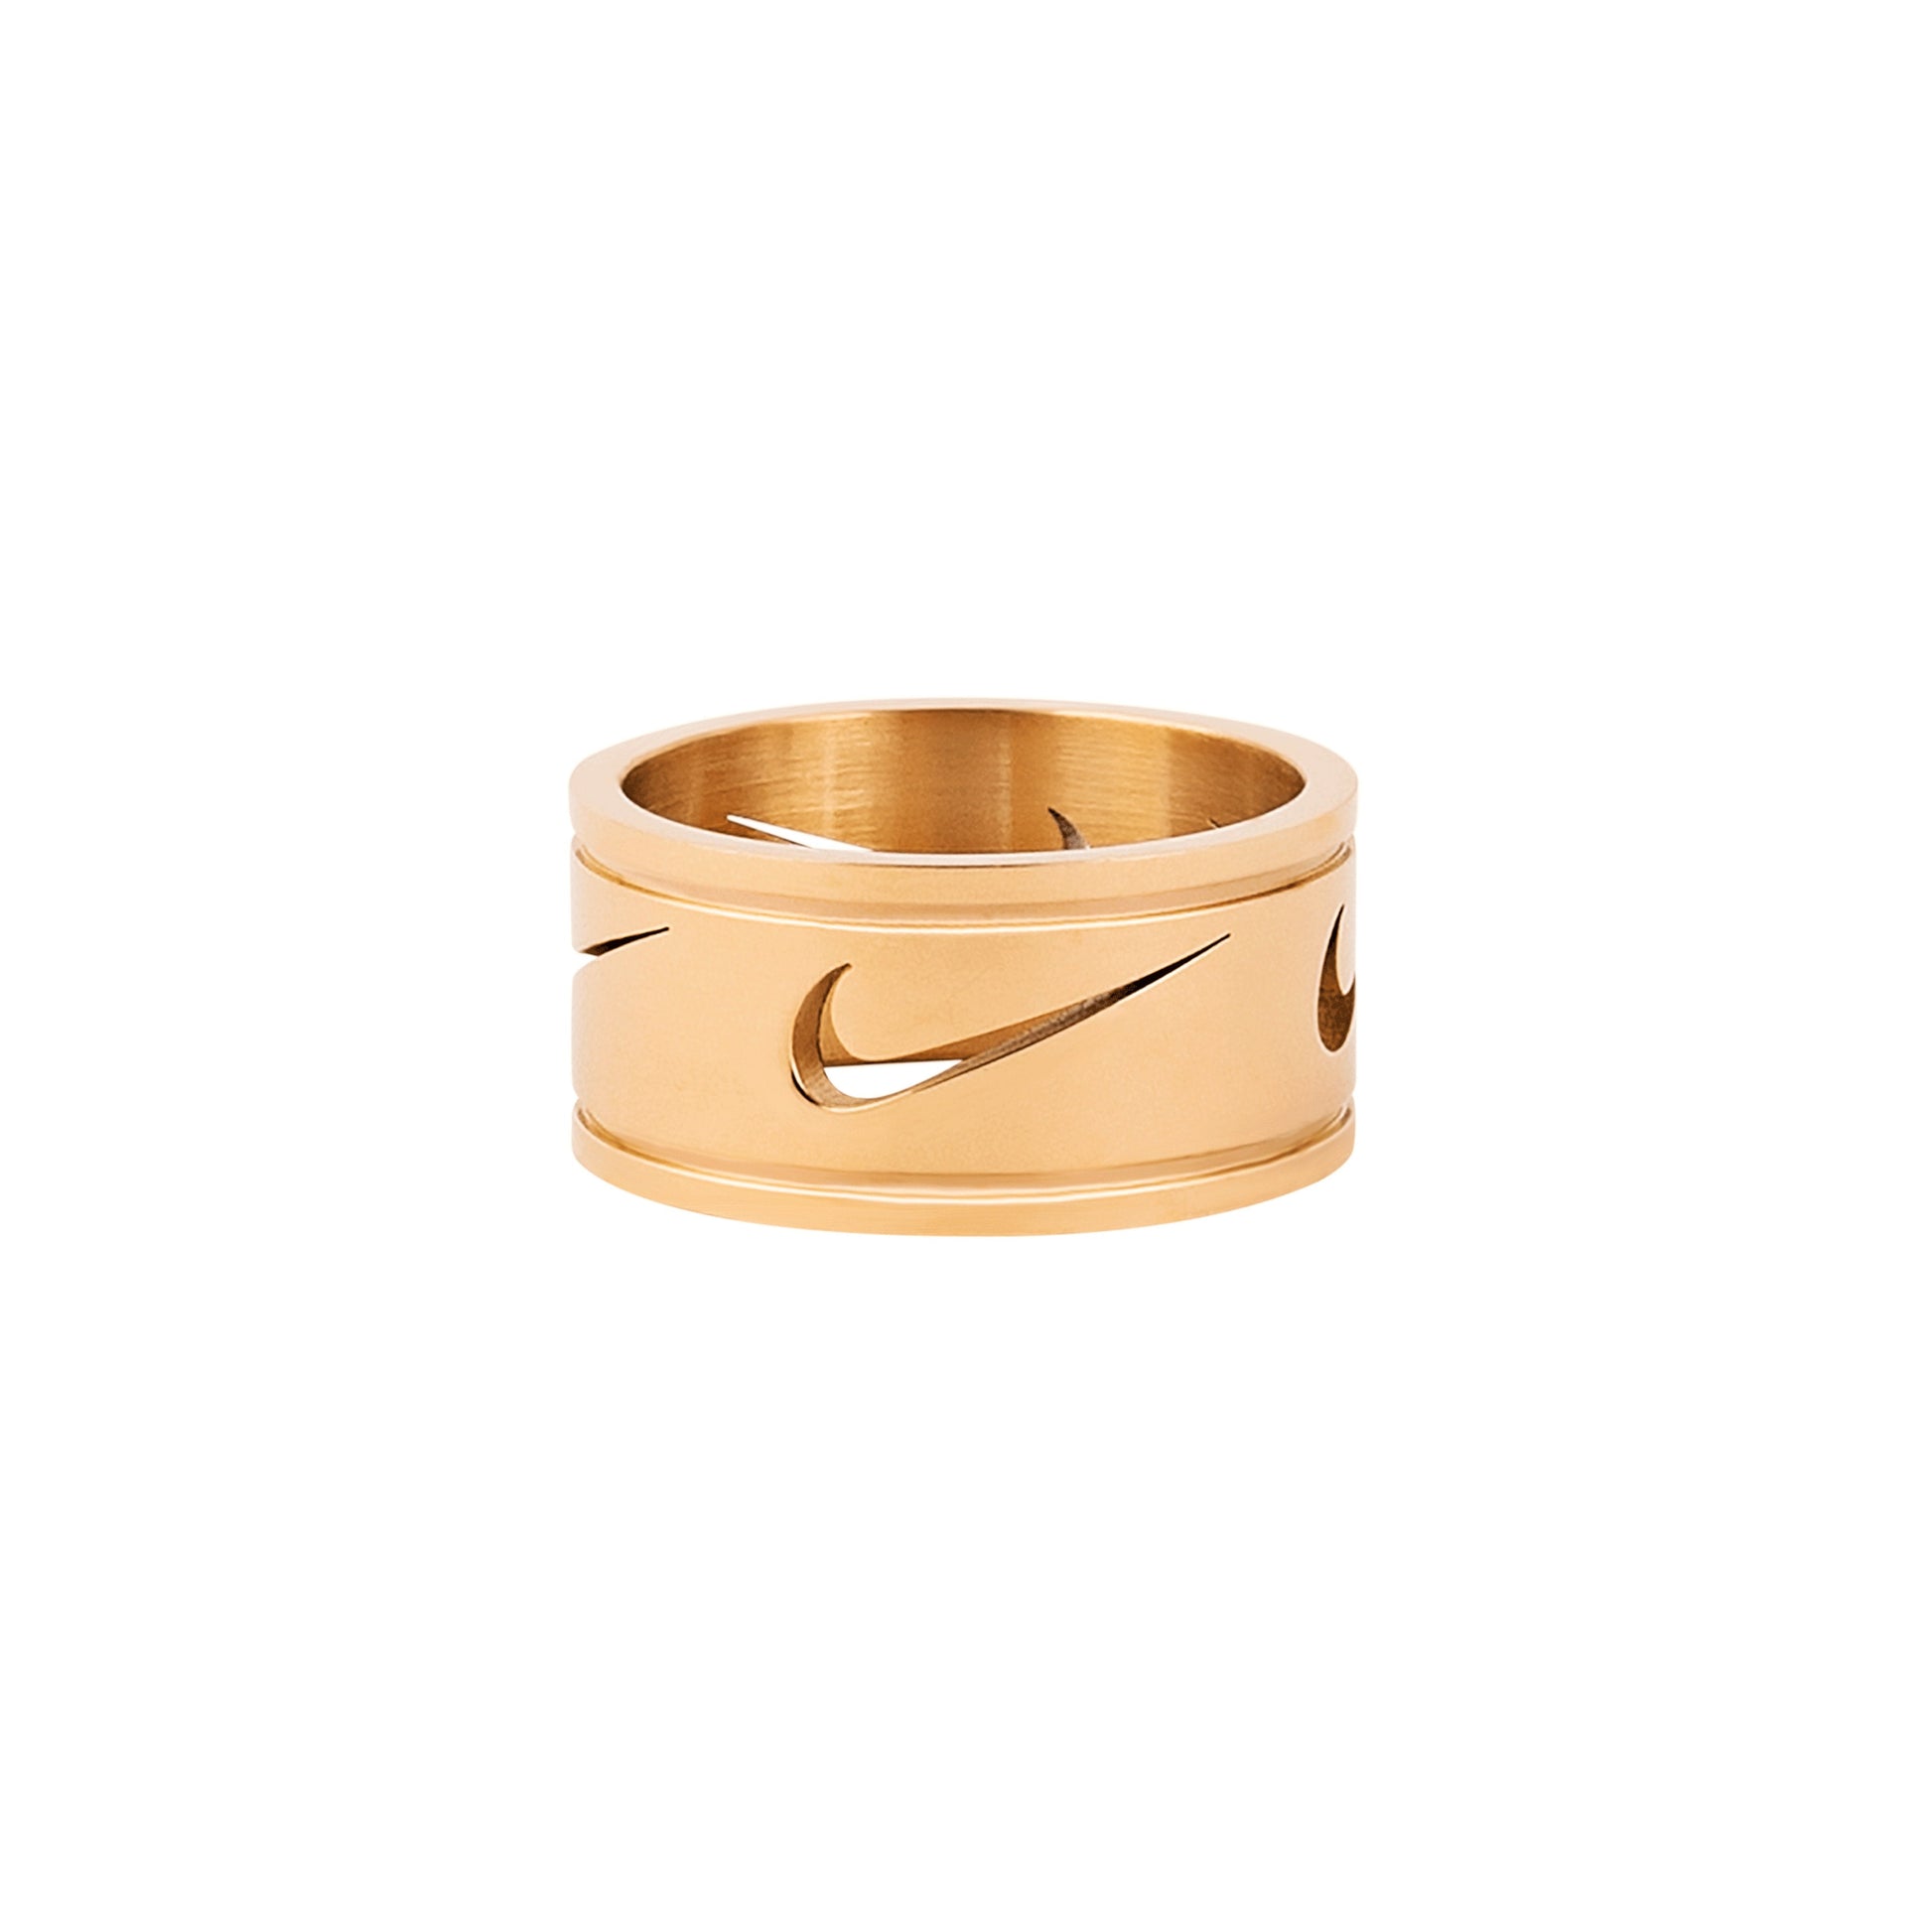 Nike Cut Out Repeat Ring Gold - RetroRings